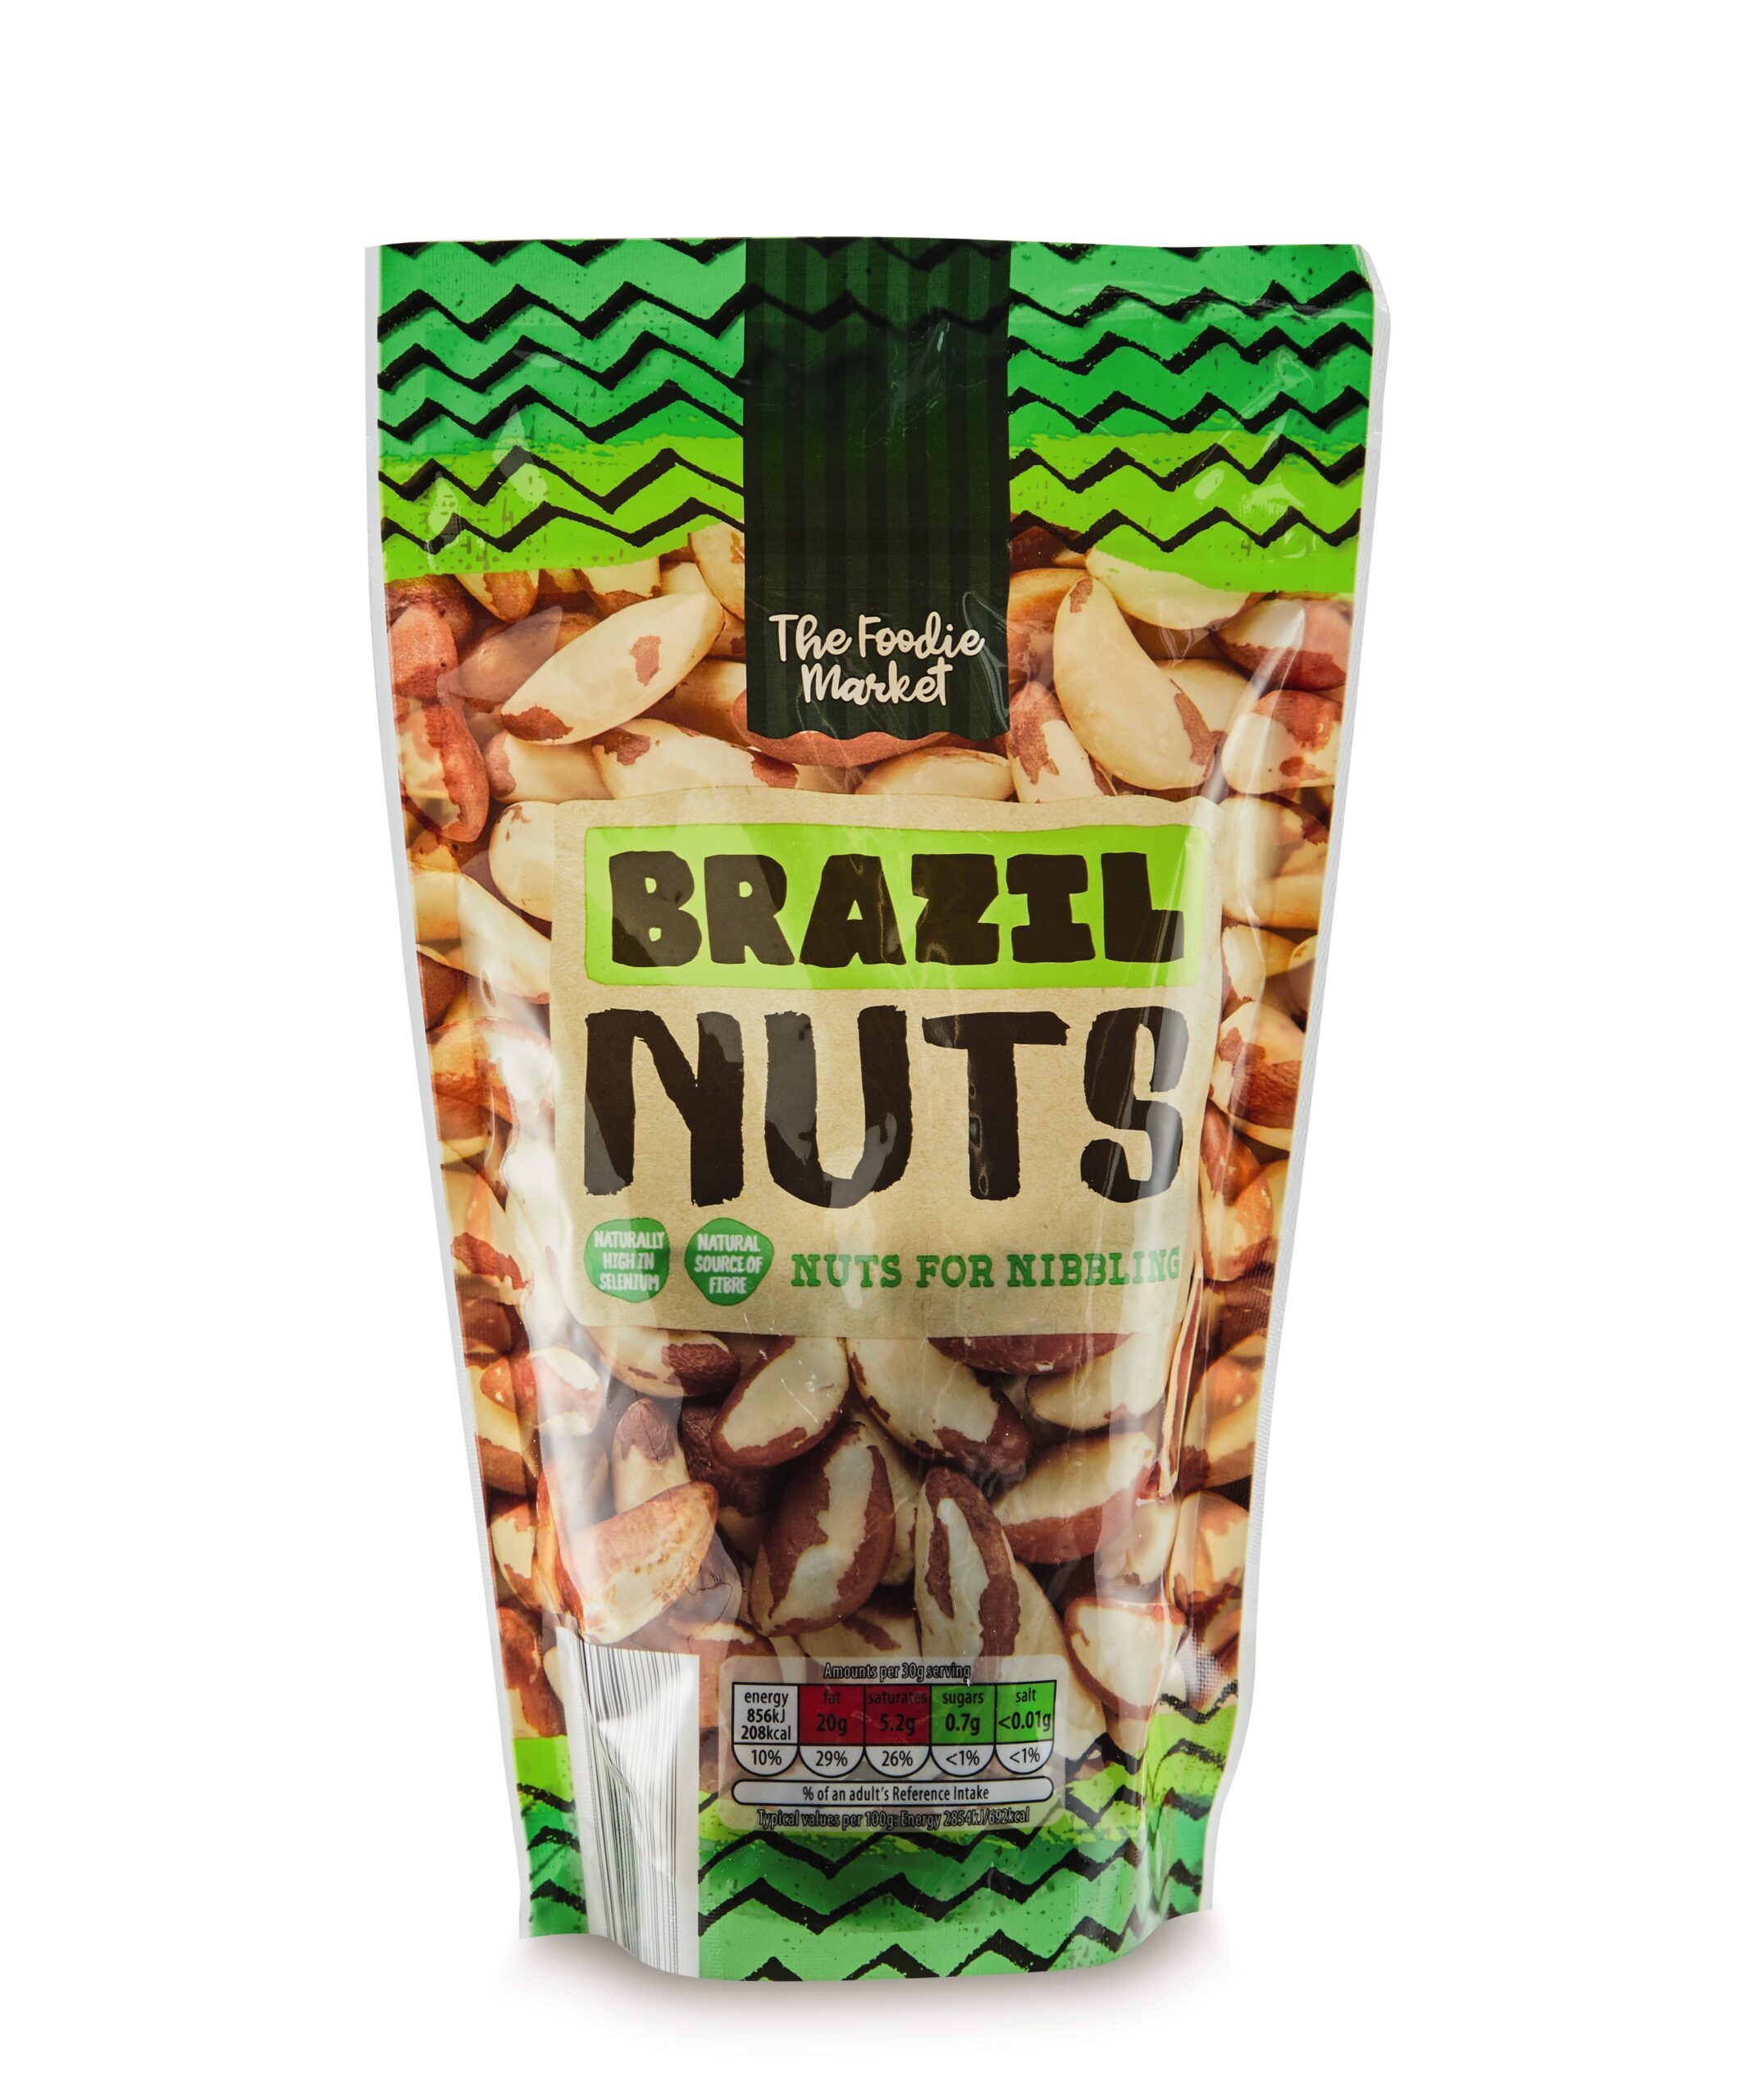 The Foodie Market Brazil Nuts €2.29 (20g)